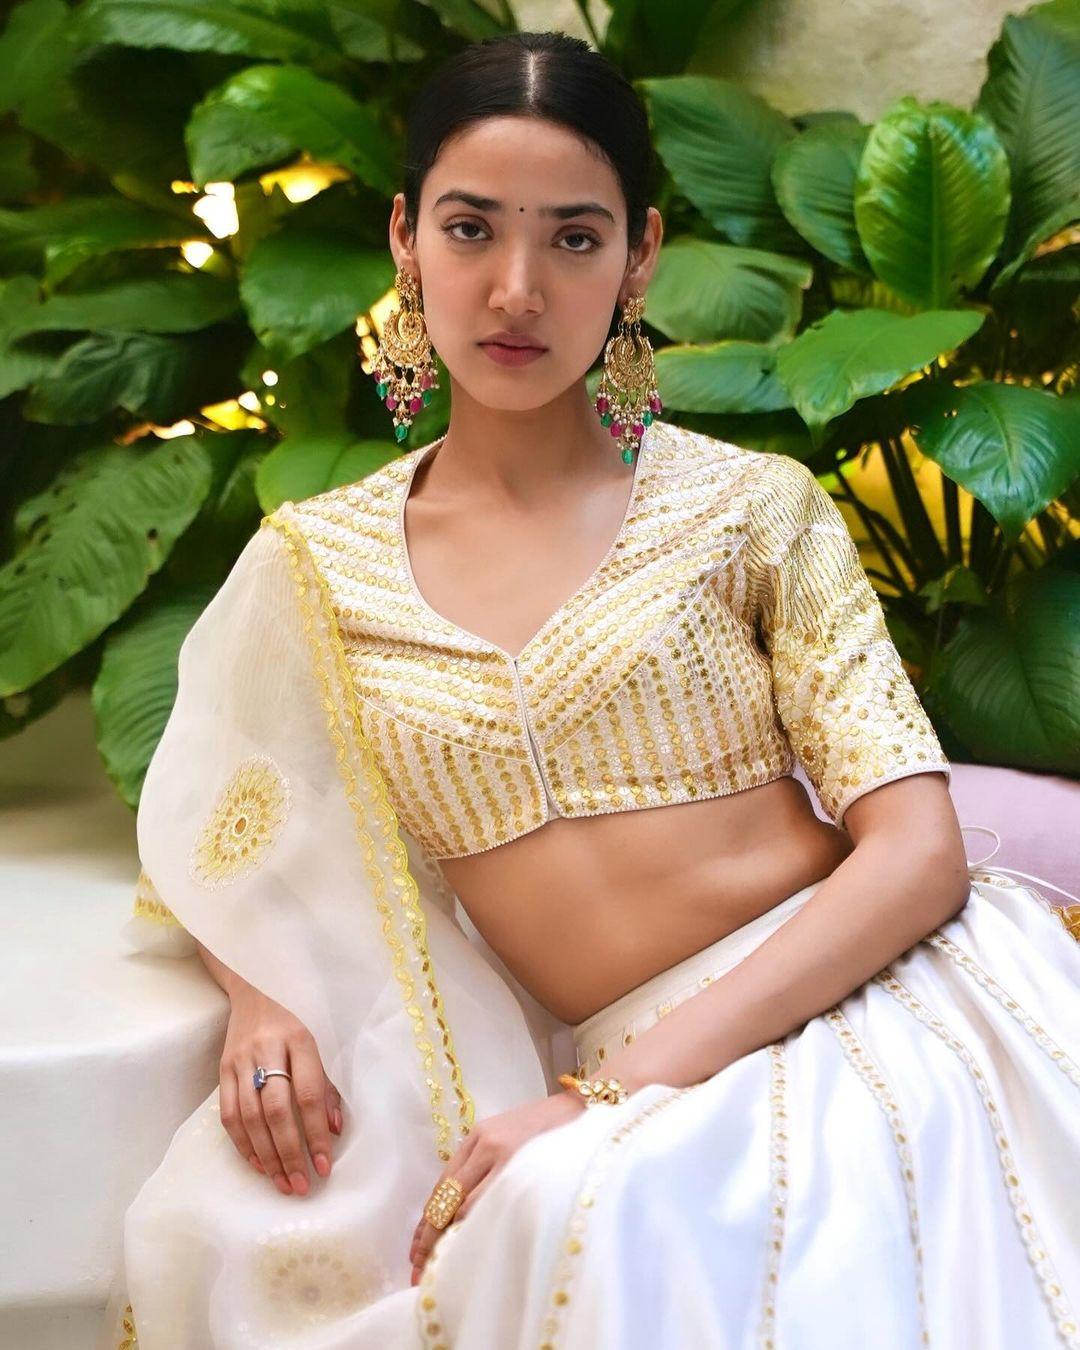 Medha stuns in a beautiful white lehenga adorned with golden prints